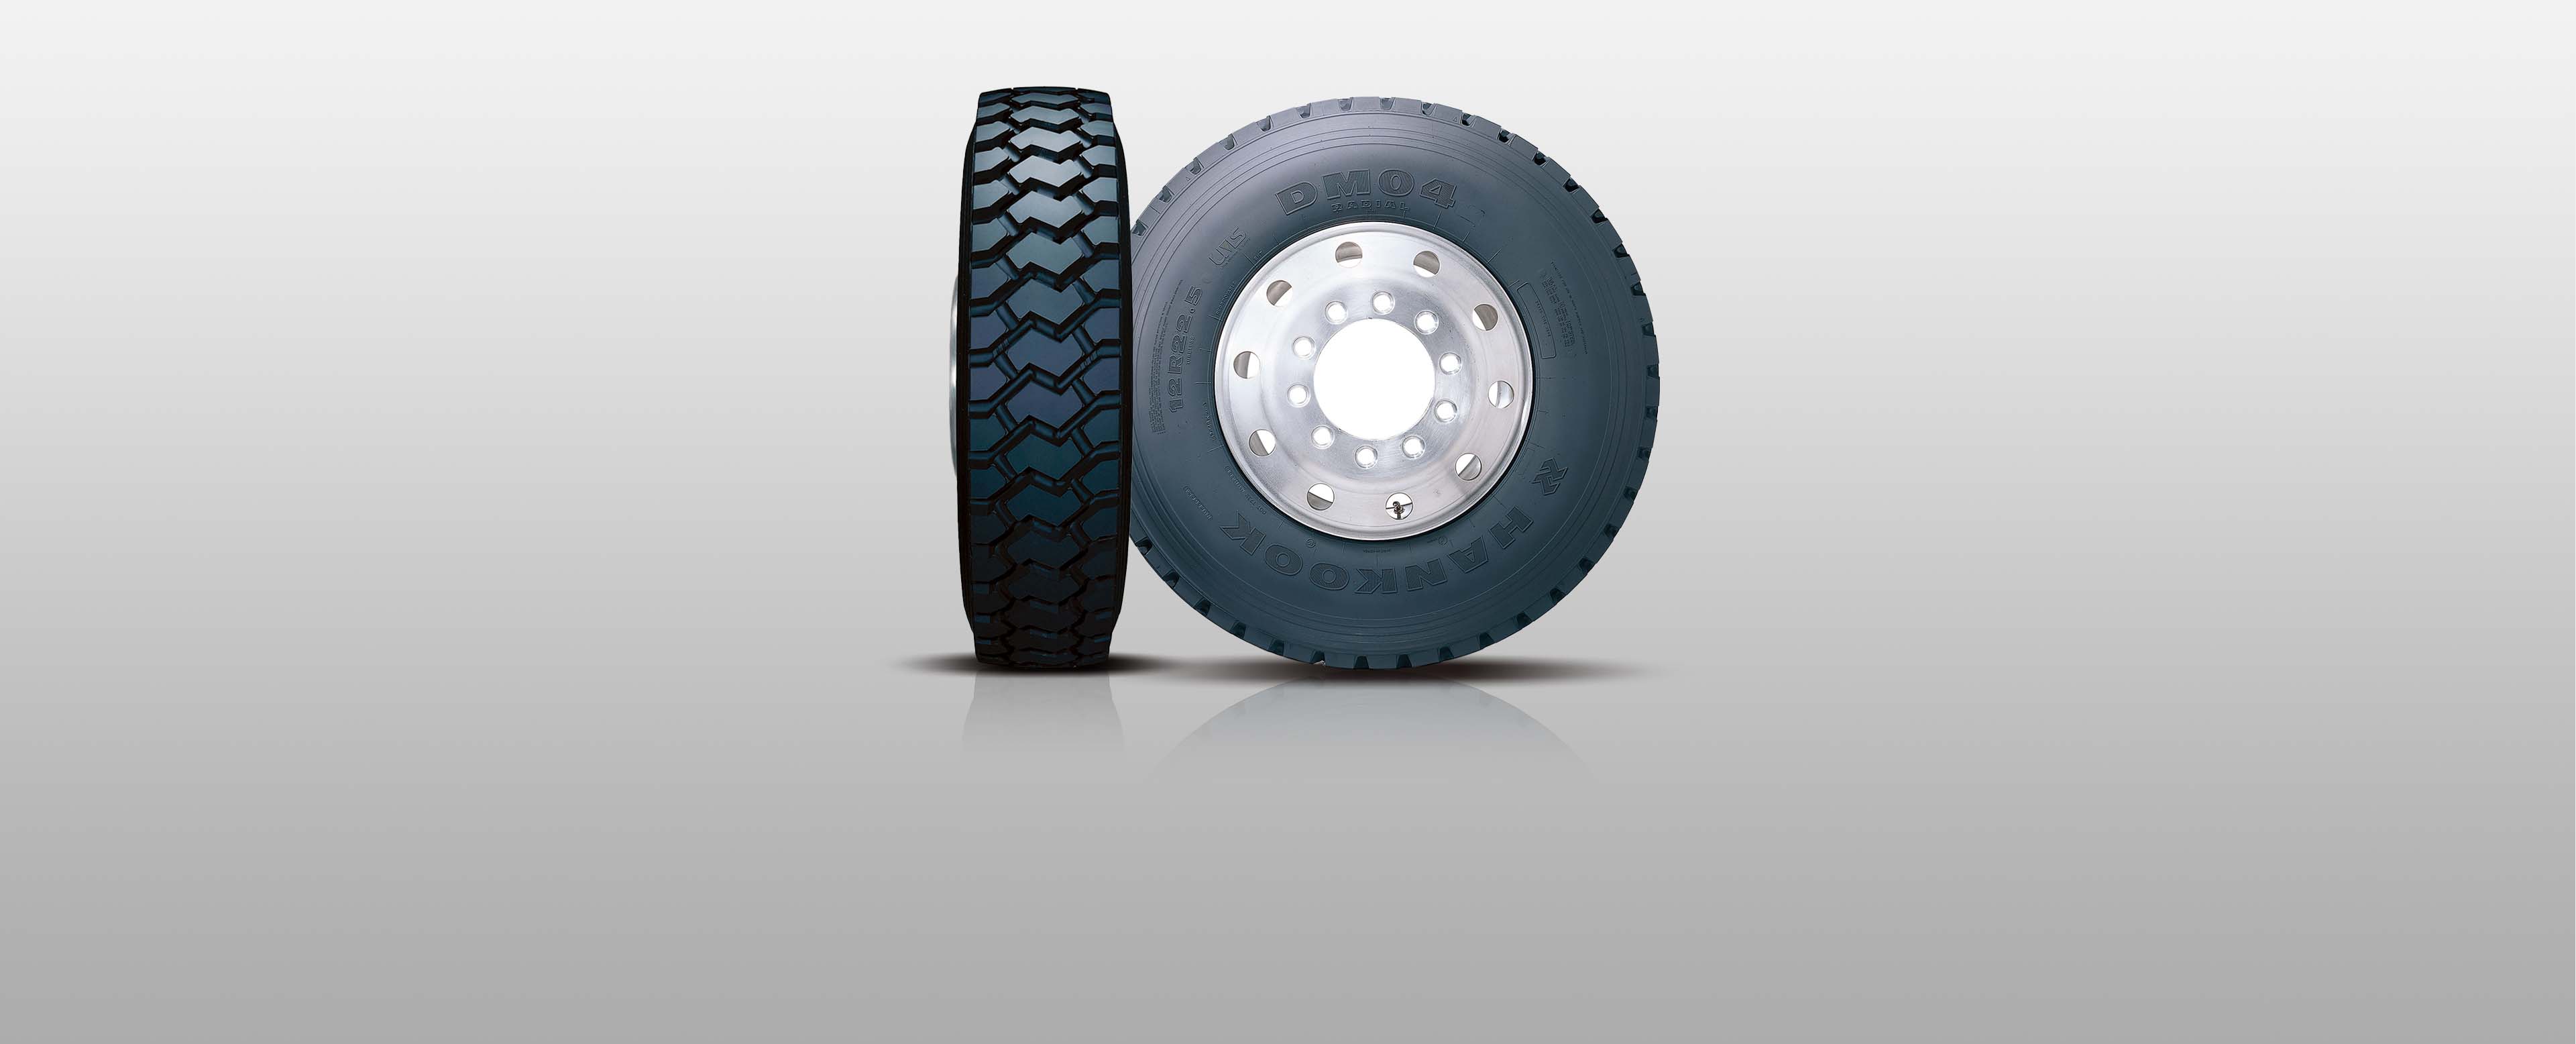 Hankook Tire & Technology-Tires-Smart-DM04-Strong driving power in the mud and constrution sites